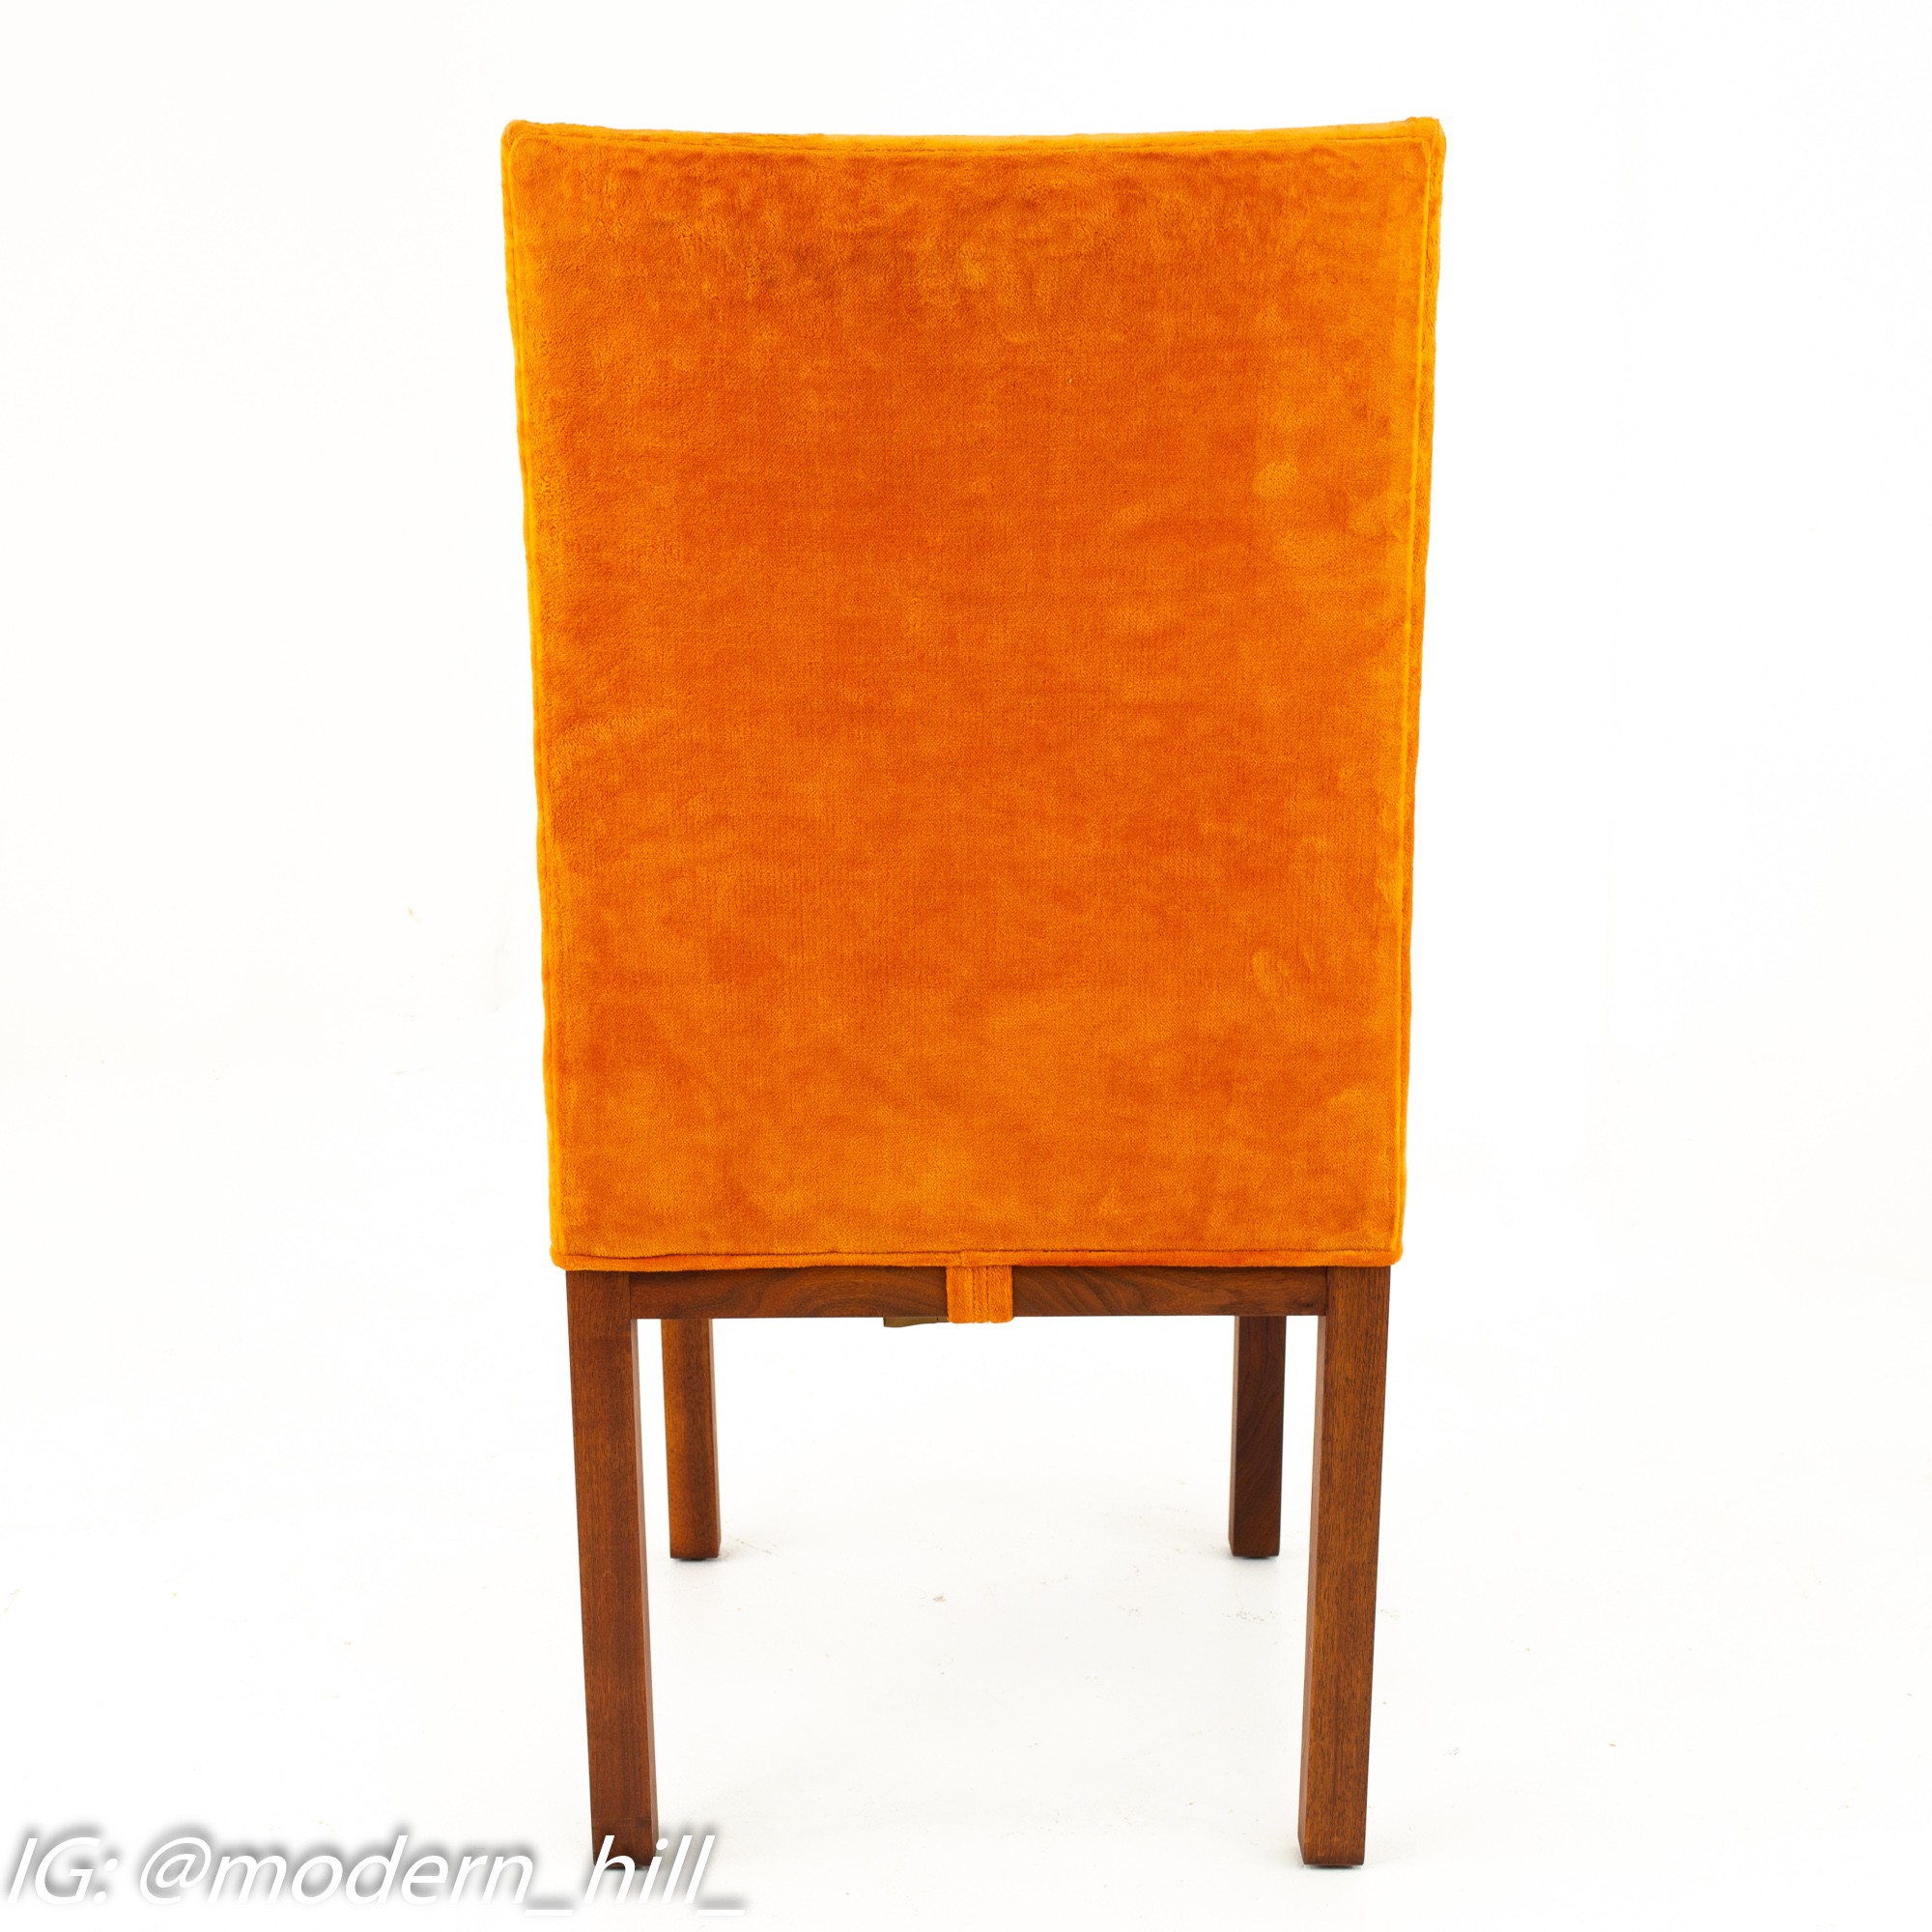 Milo Baughman Style Dillingham Mid Century Orange and Walnut Upholstered Dining Chairs